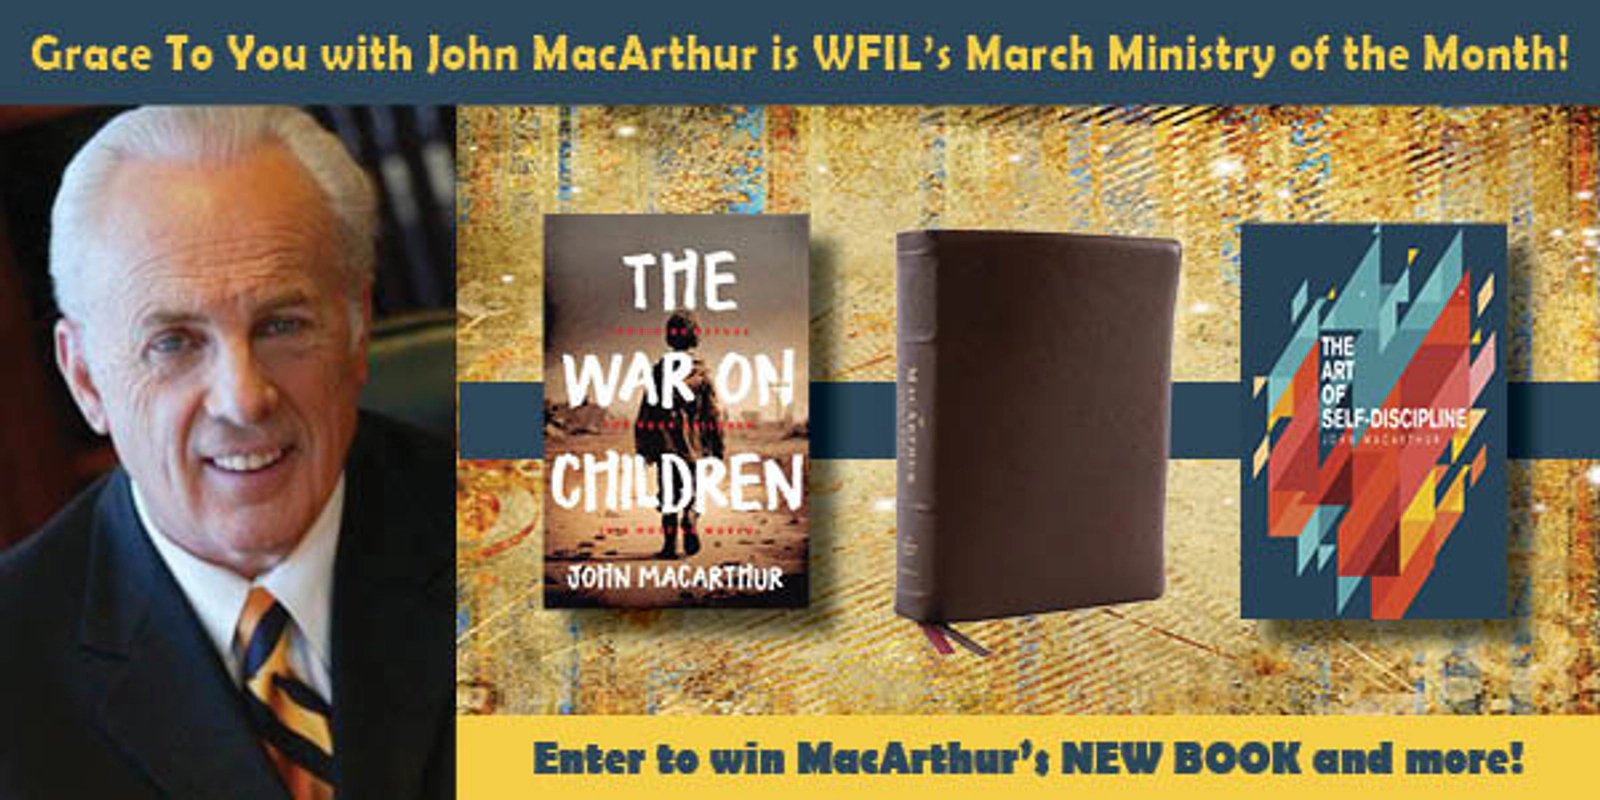 Enter to win John MacArthur's new book and more!